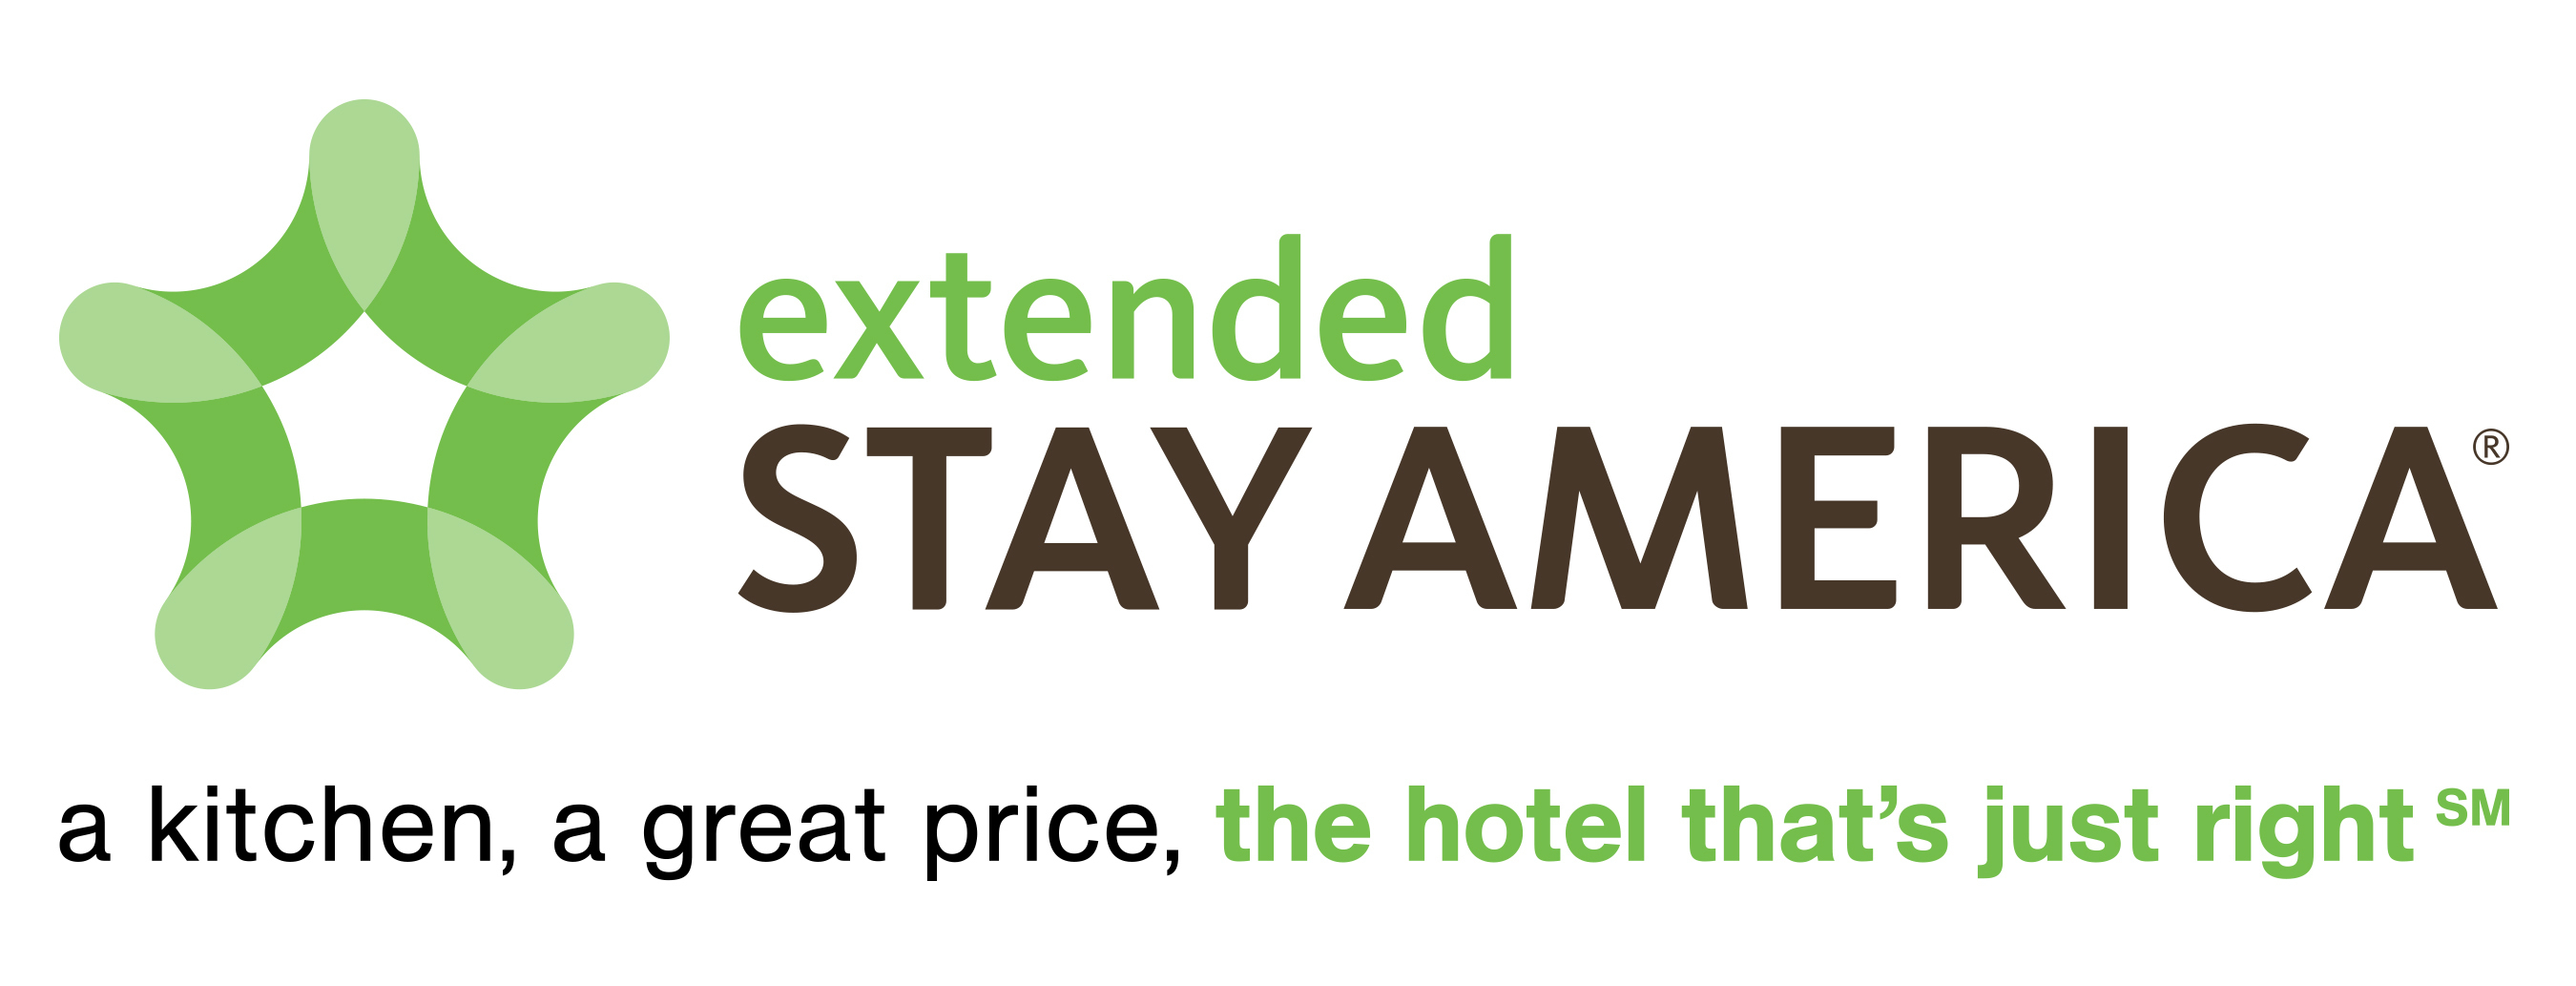 Extended Stay America Logo